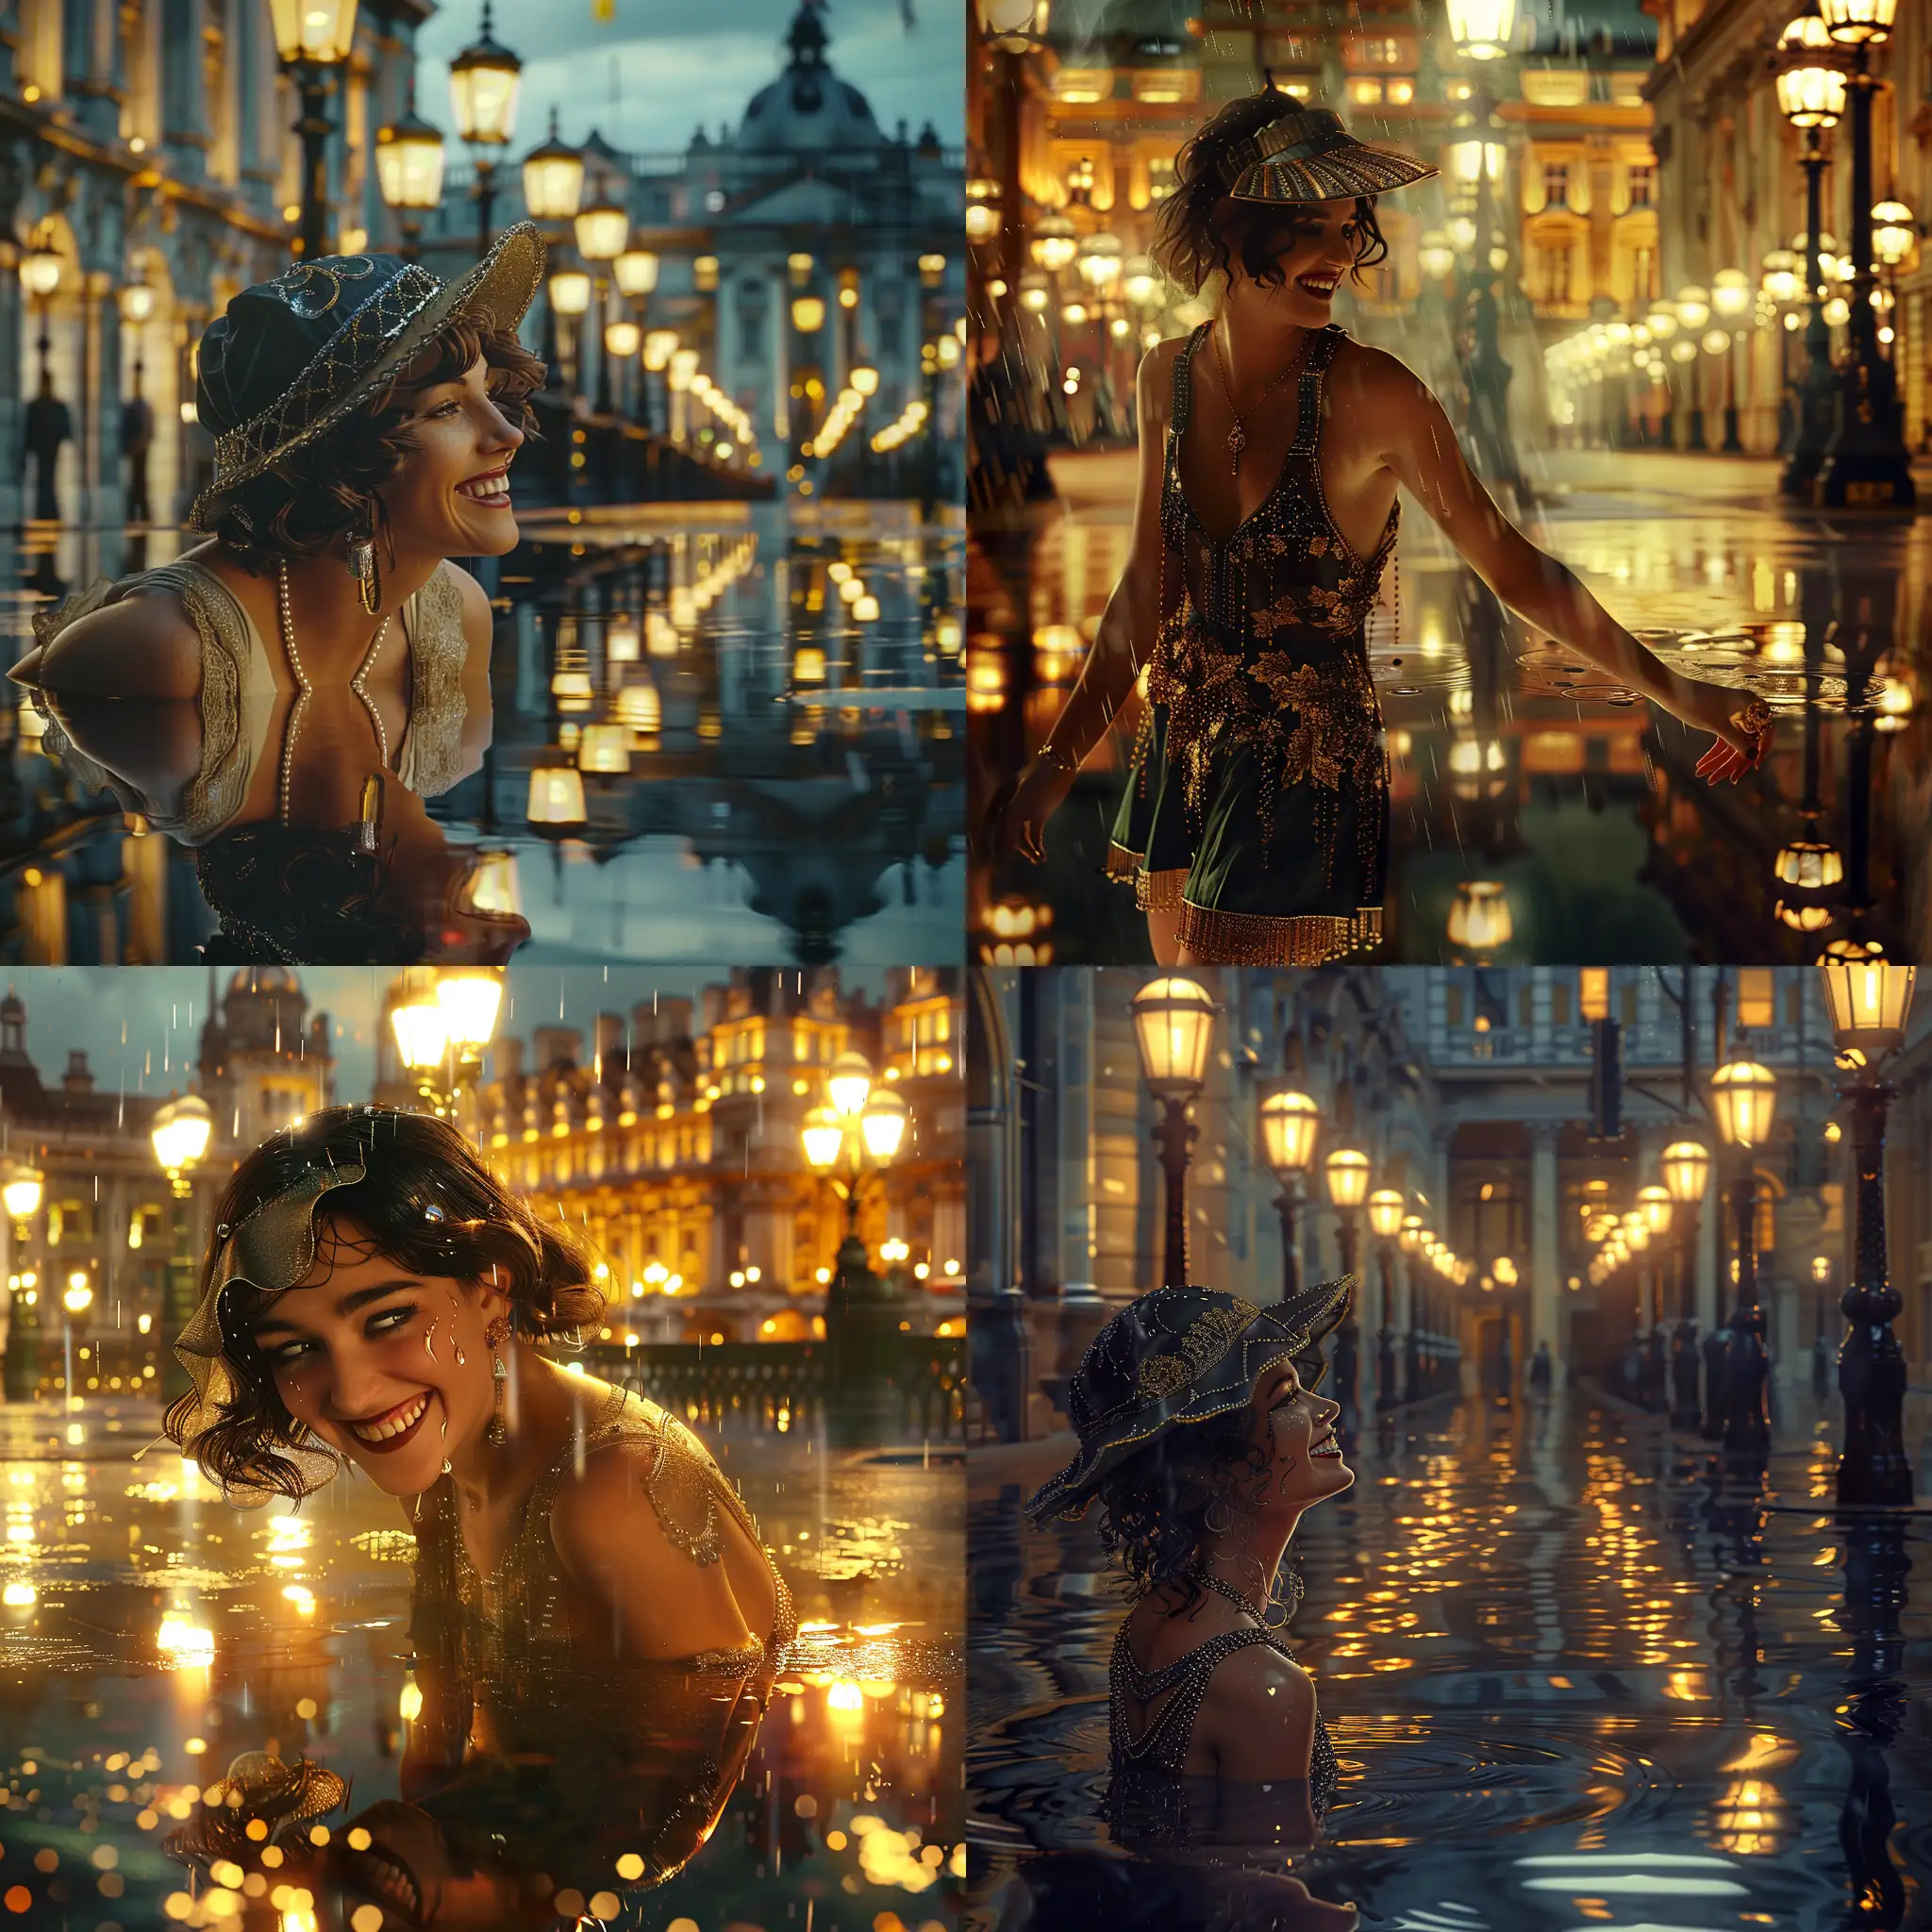 A highly detailed image of a beautiful 1920s flapper woman smiling as she dances in the rain in central London. The street lamps are reflected in the puddles. Beautiful magical mysterious fantasy surreal highly detailed